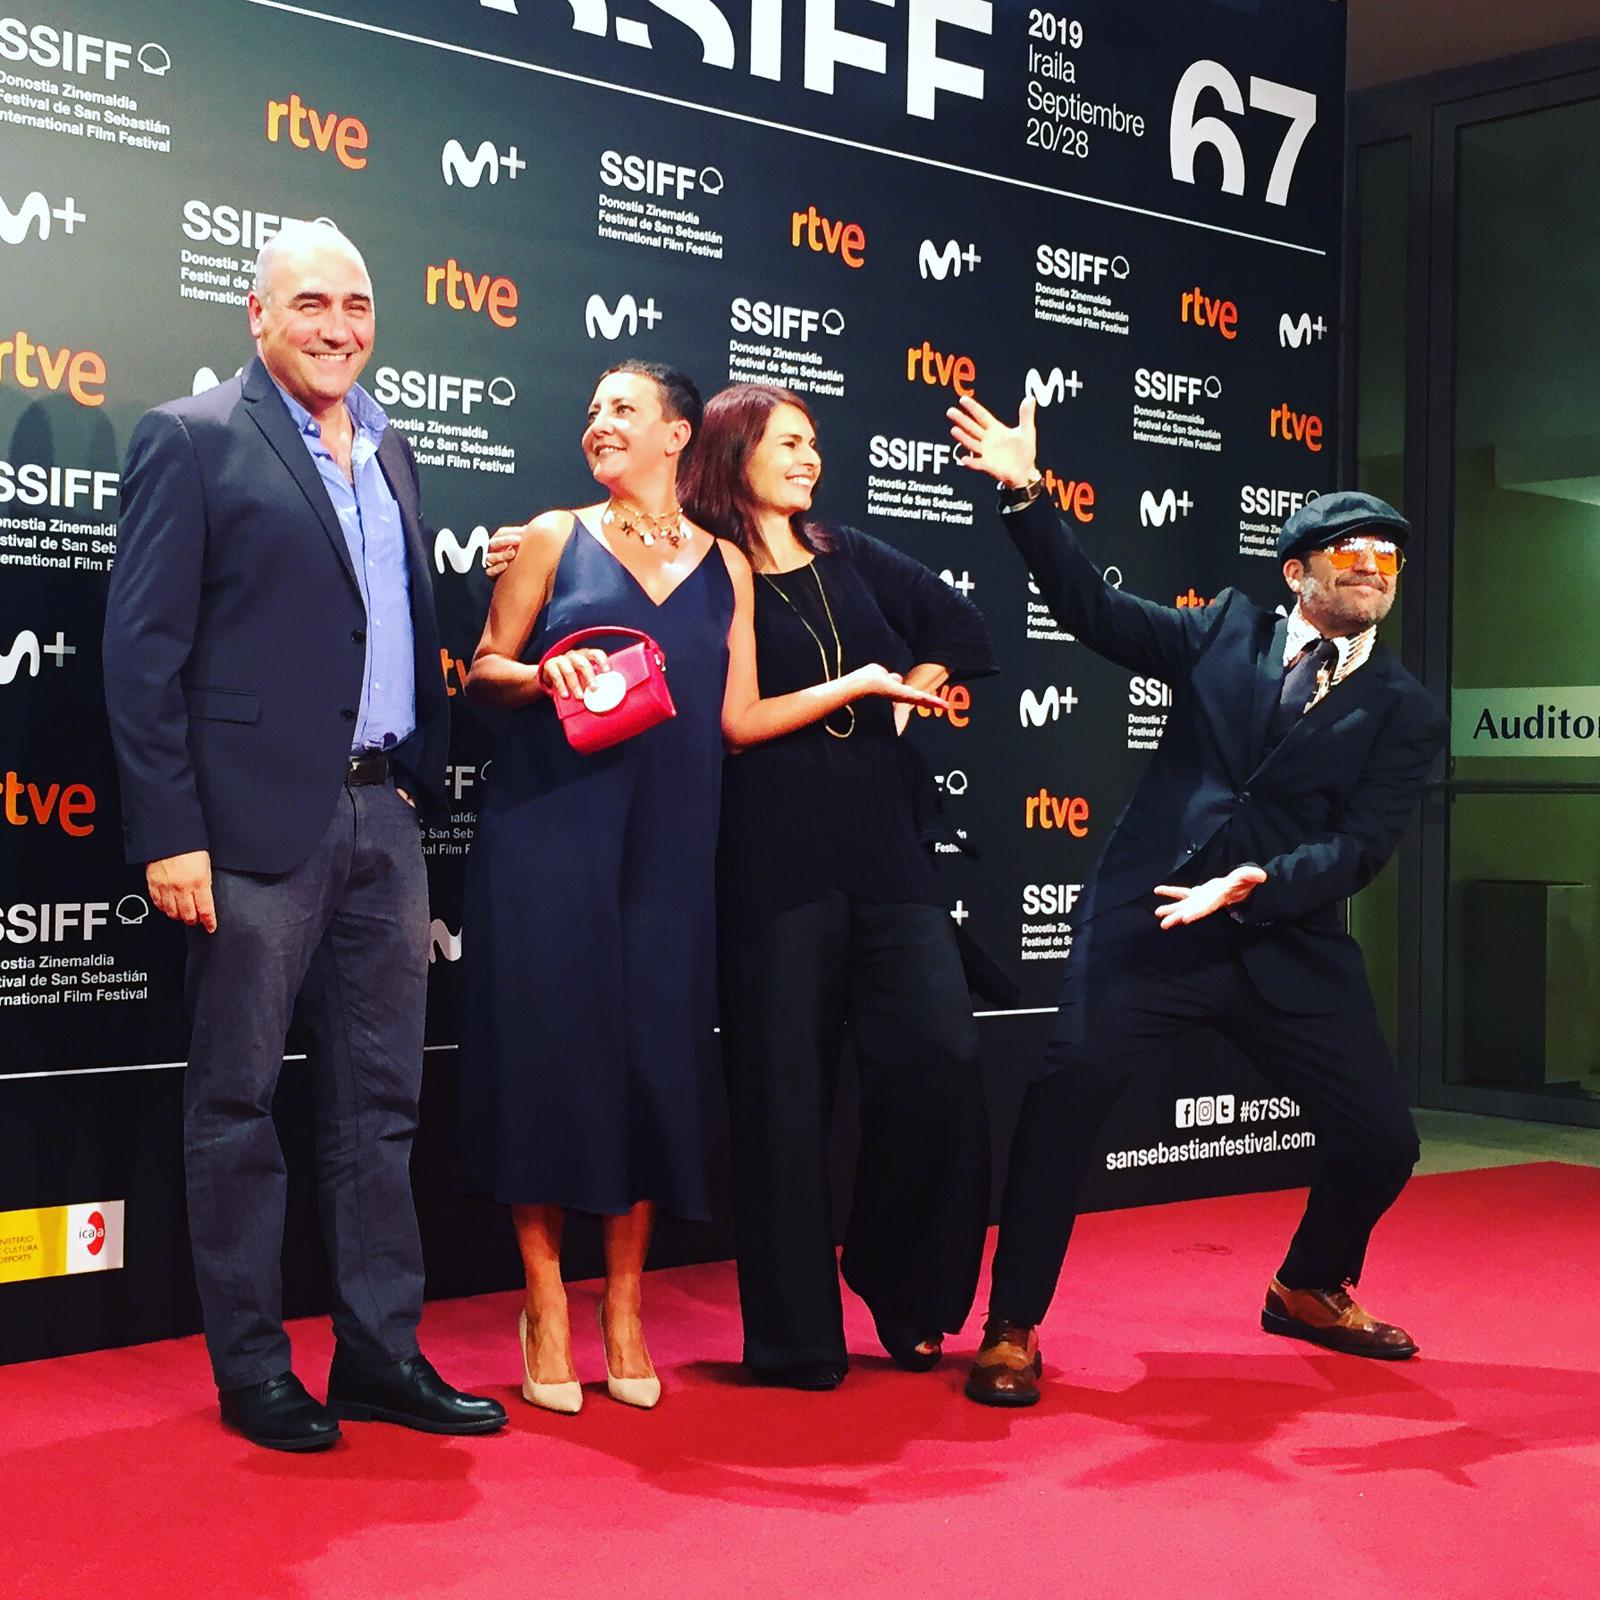 Laughs and cackles with Turu at 67 SSIFF